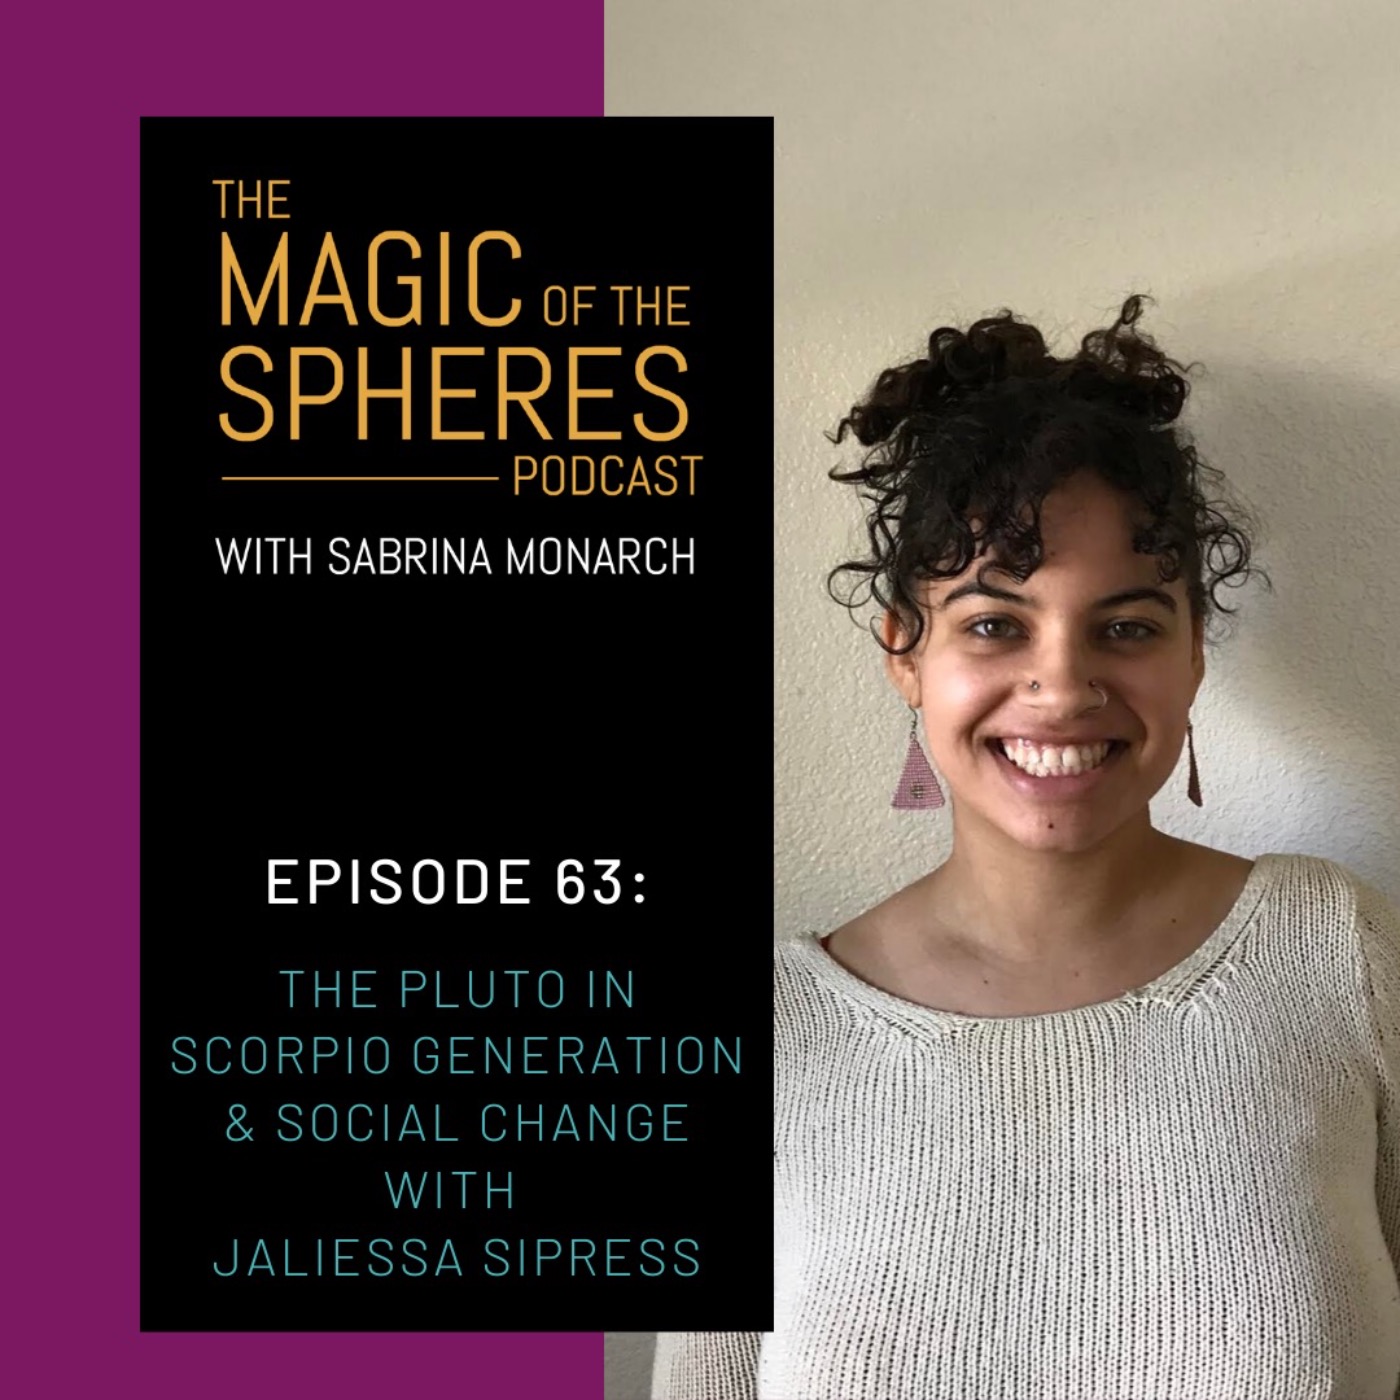 The Pluto in Scorpio Generation & Social Change with Jaliessa Sipress